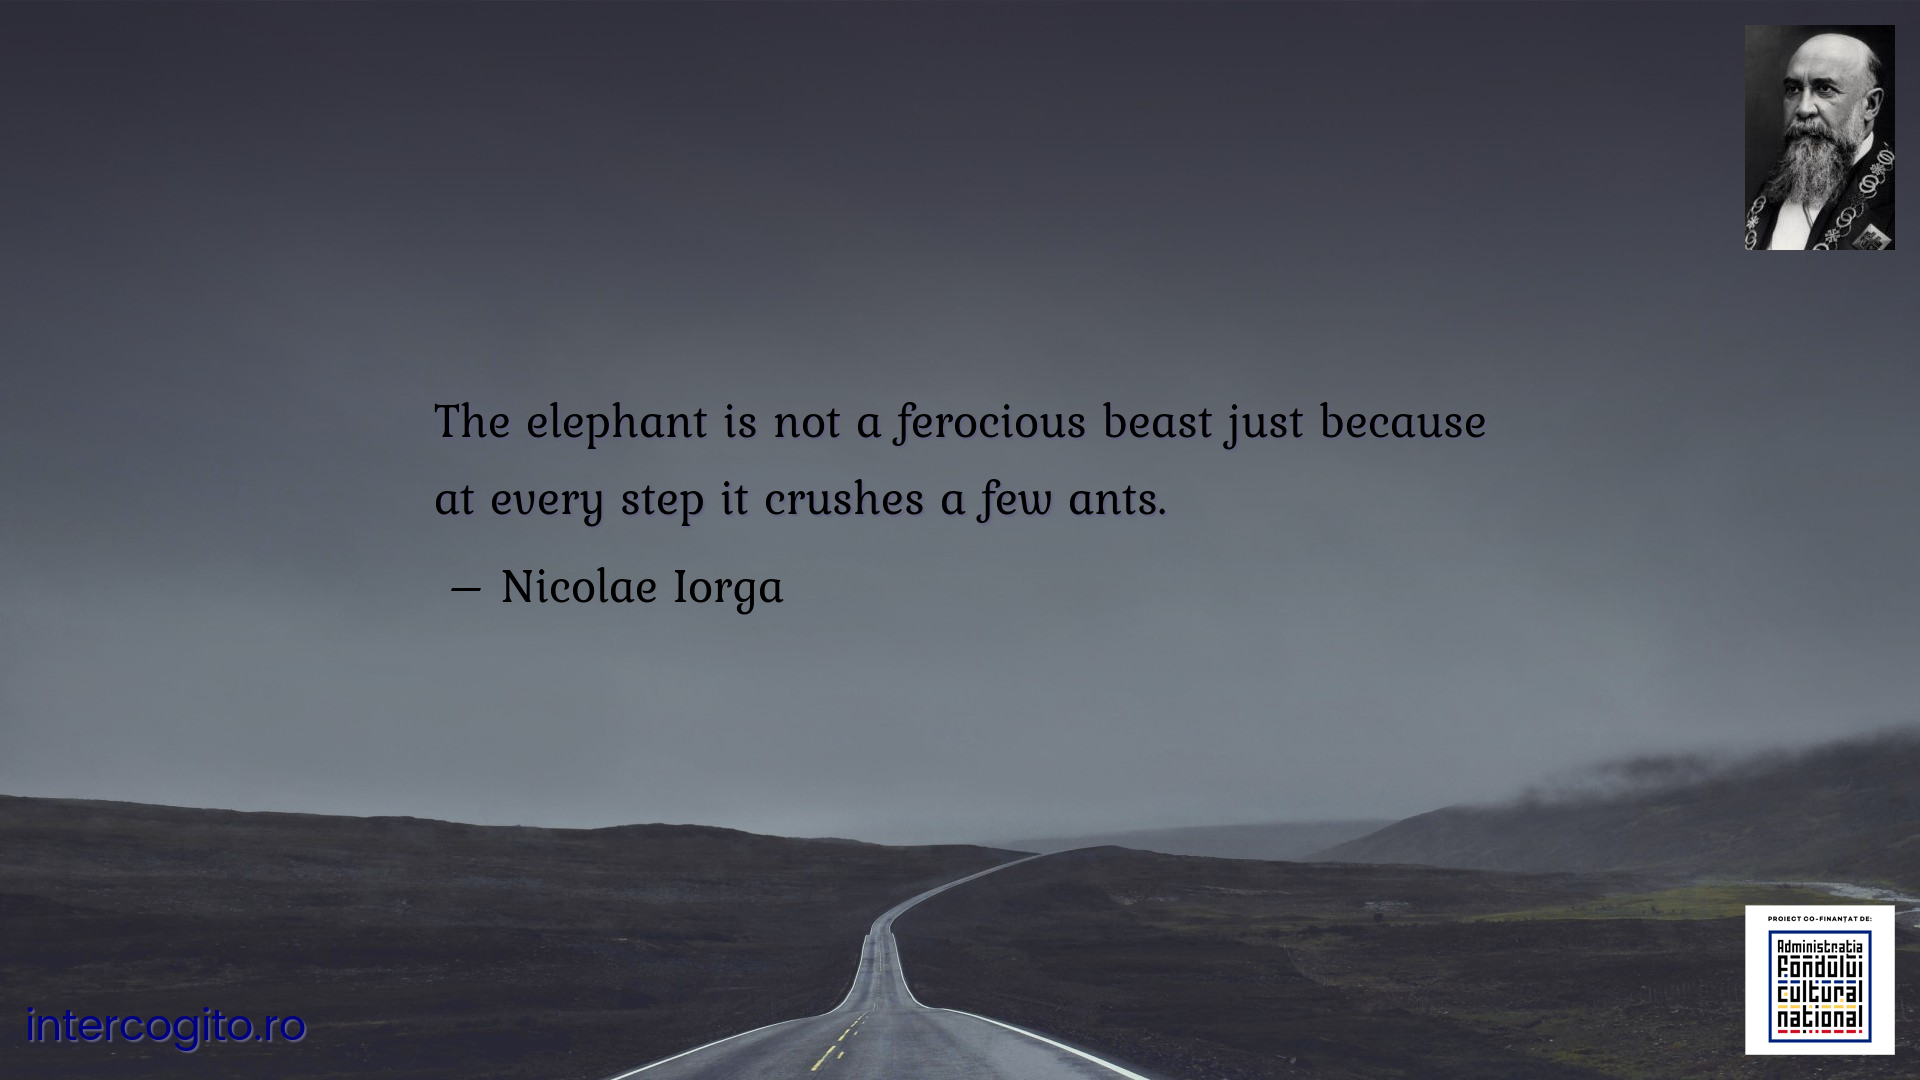 The elephant is not a ferocious beast just because at every step it crushes a few ants.